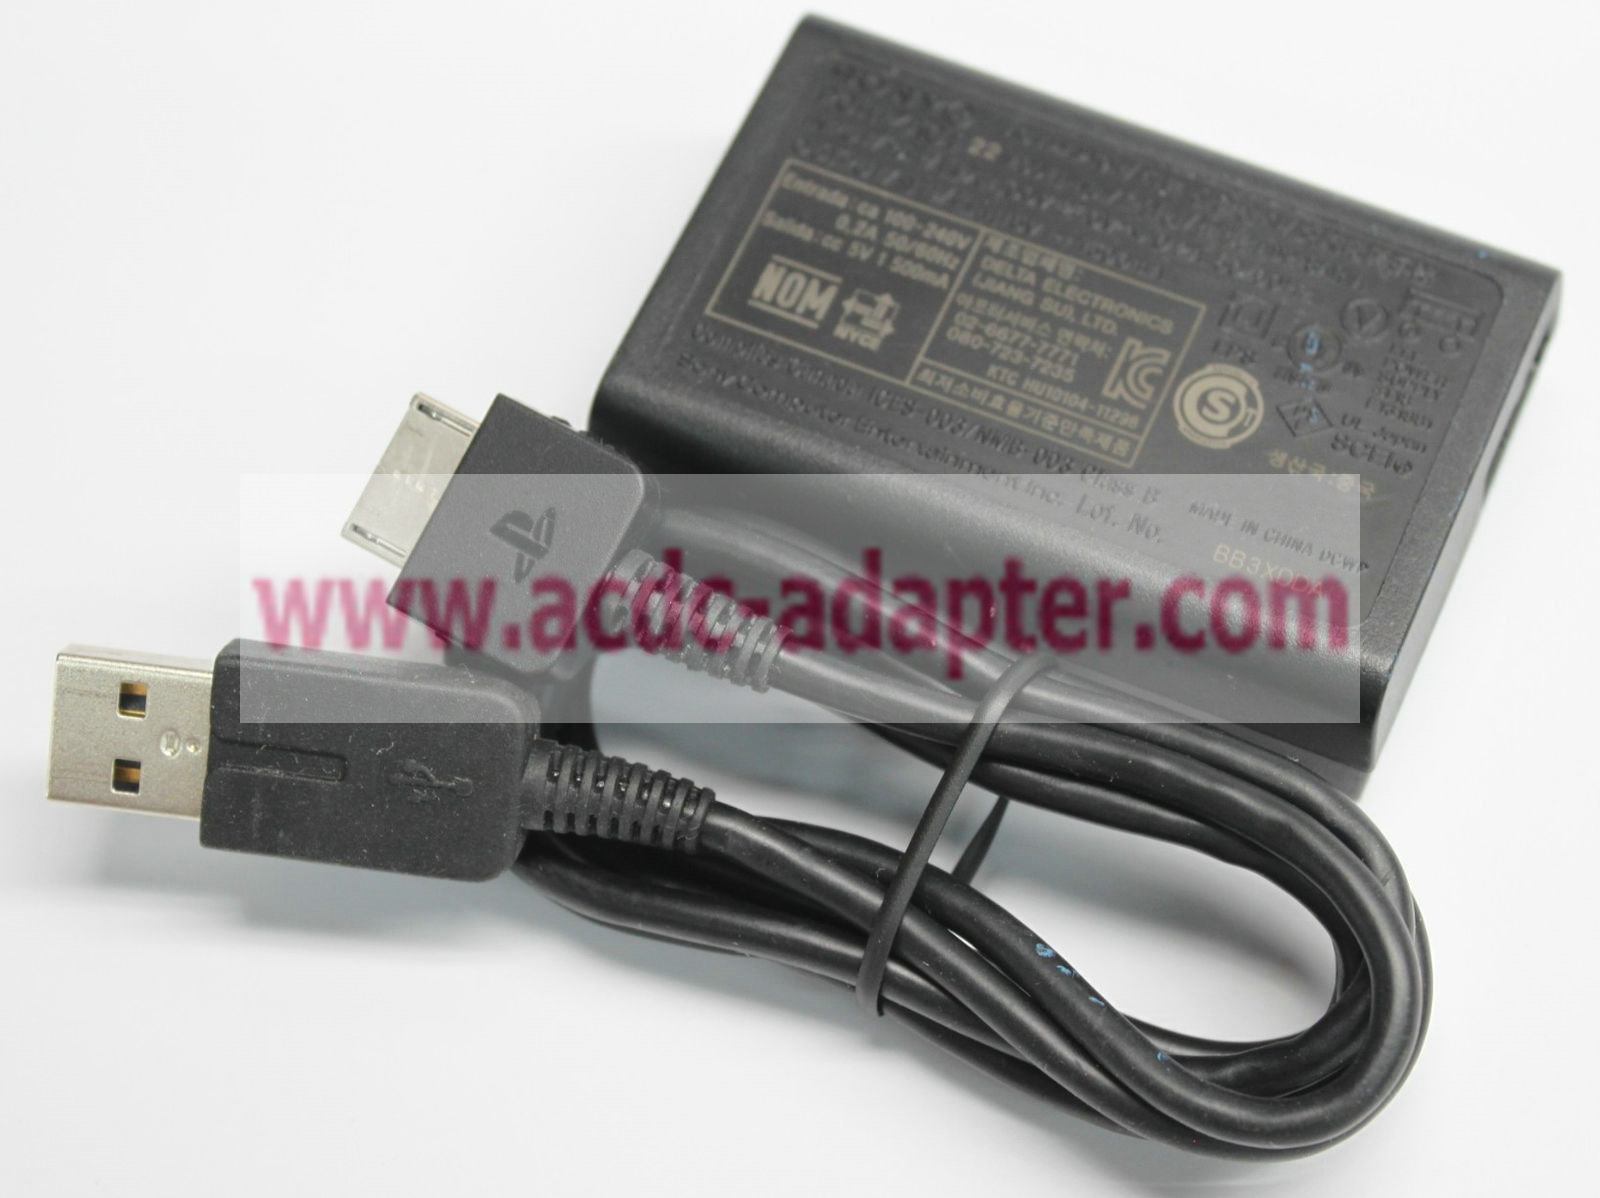 Genuine 5V 1500 mA Sony PCH-ZAC1 AC Adapter USB Power Supply Cord Charger